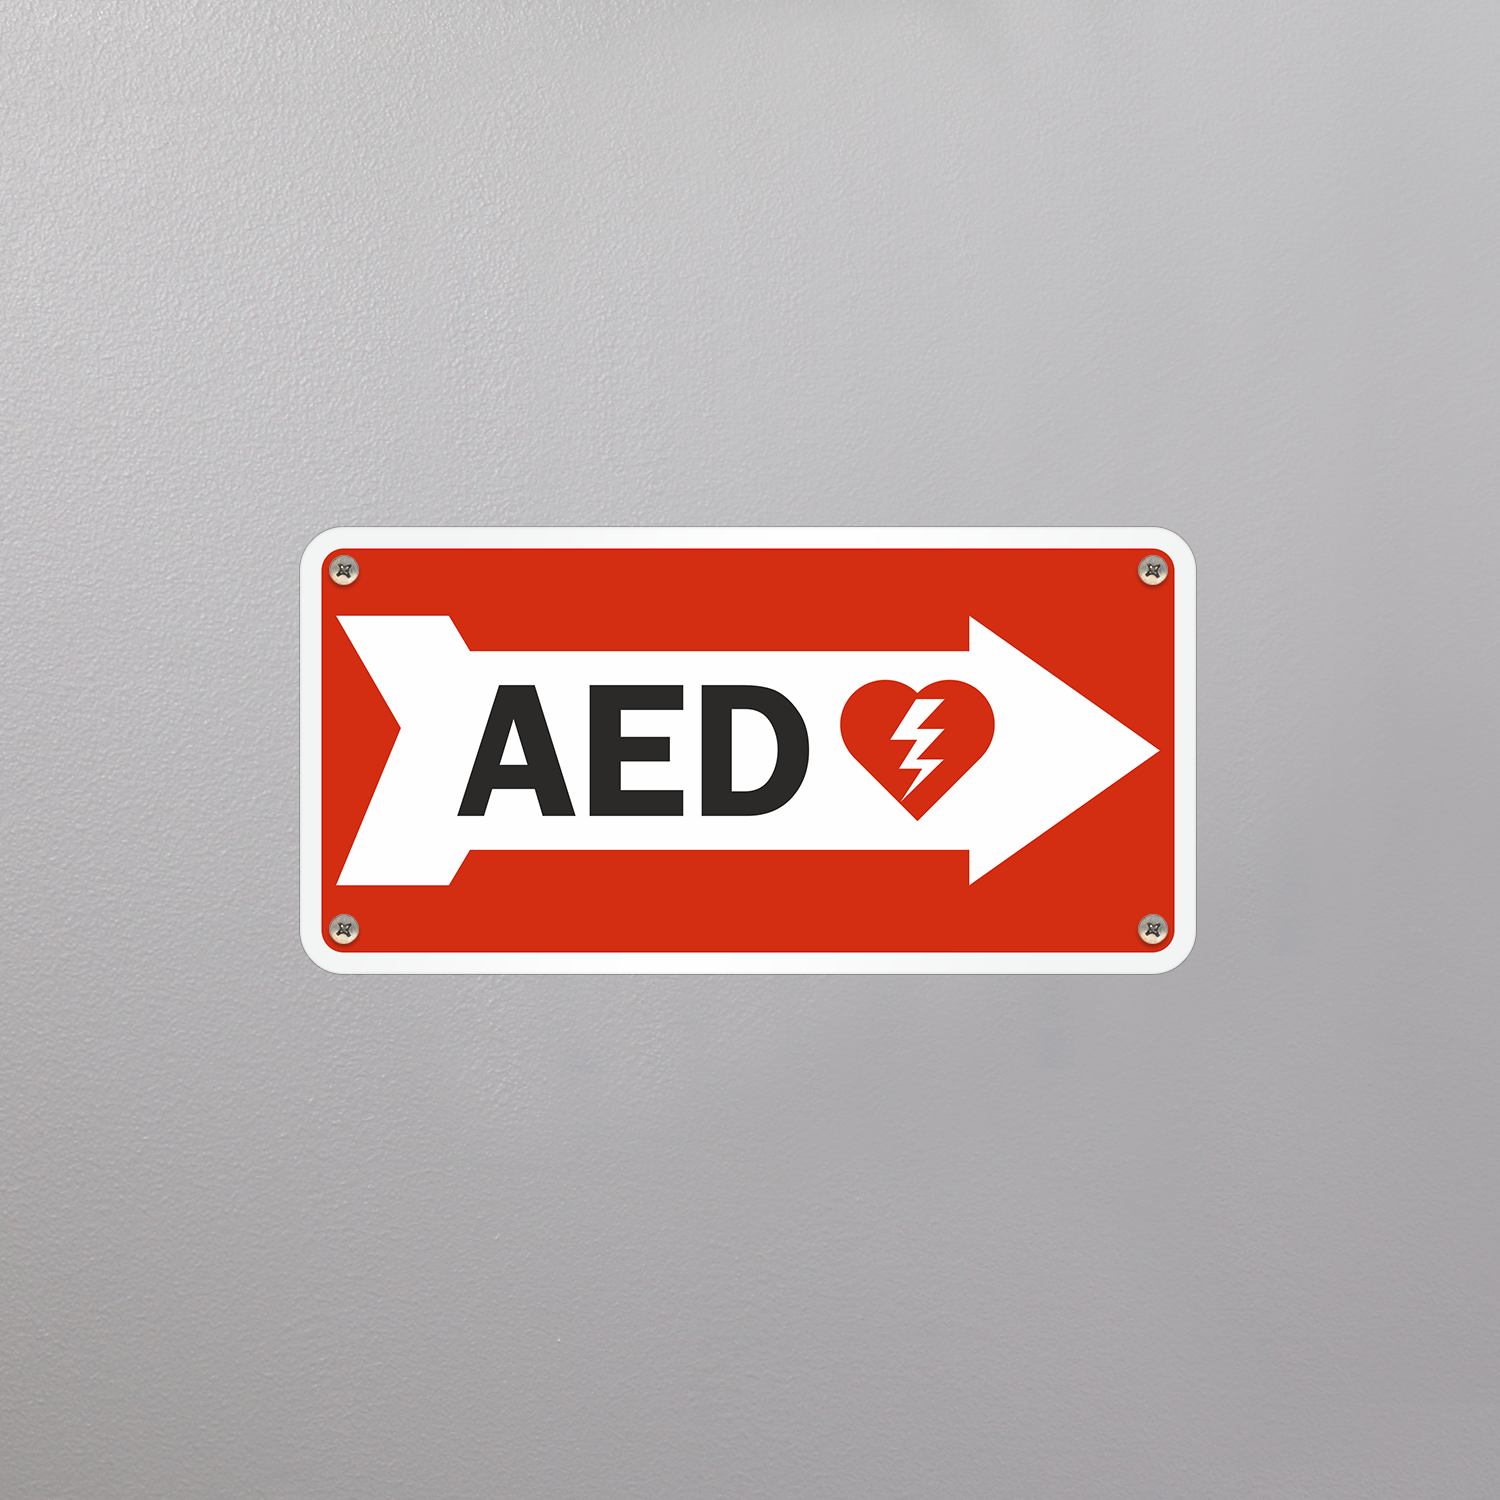 AED Right Arrow Label